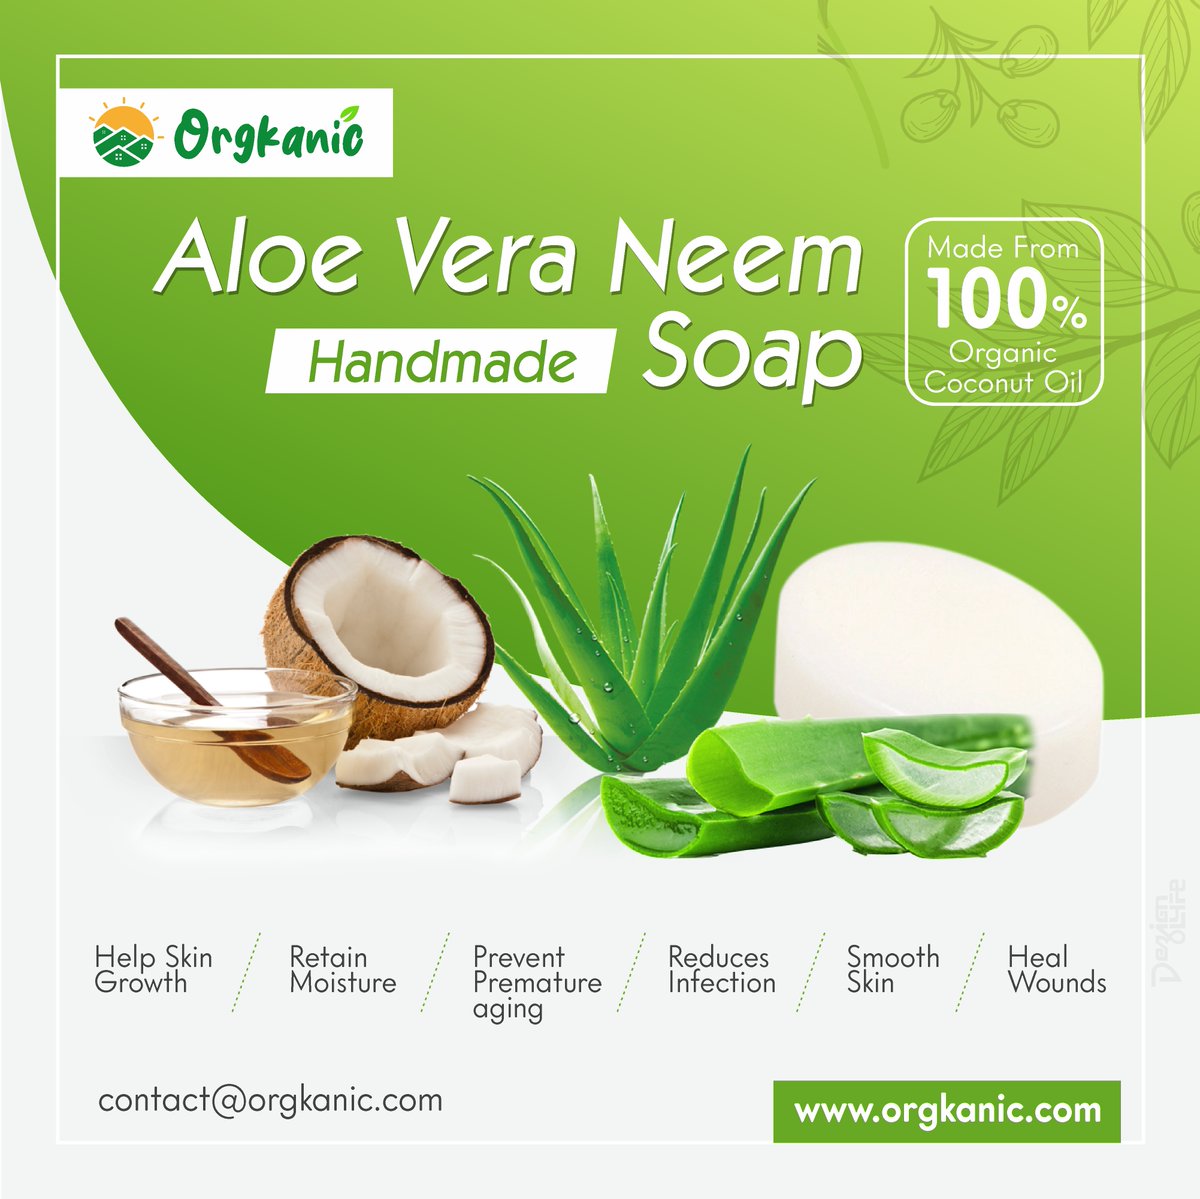 Aloe Vera Neem Soap
~ Made From 100% Organic  Coconut Oil ~

Benefits :
▫ Help Skin Growth
▫ Retain Moisture
▫ Reduces Infection
▫ Smooth Skin
▫ Heal Wounds

Buy Now : orgkanic.com/aloe-vera-neem…

#orgkaniconlinestore #aloeverasoap #100%natural